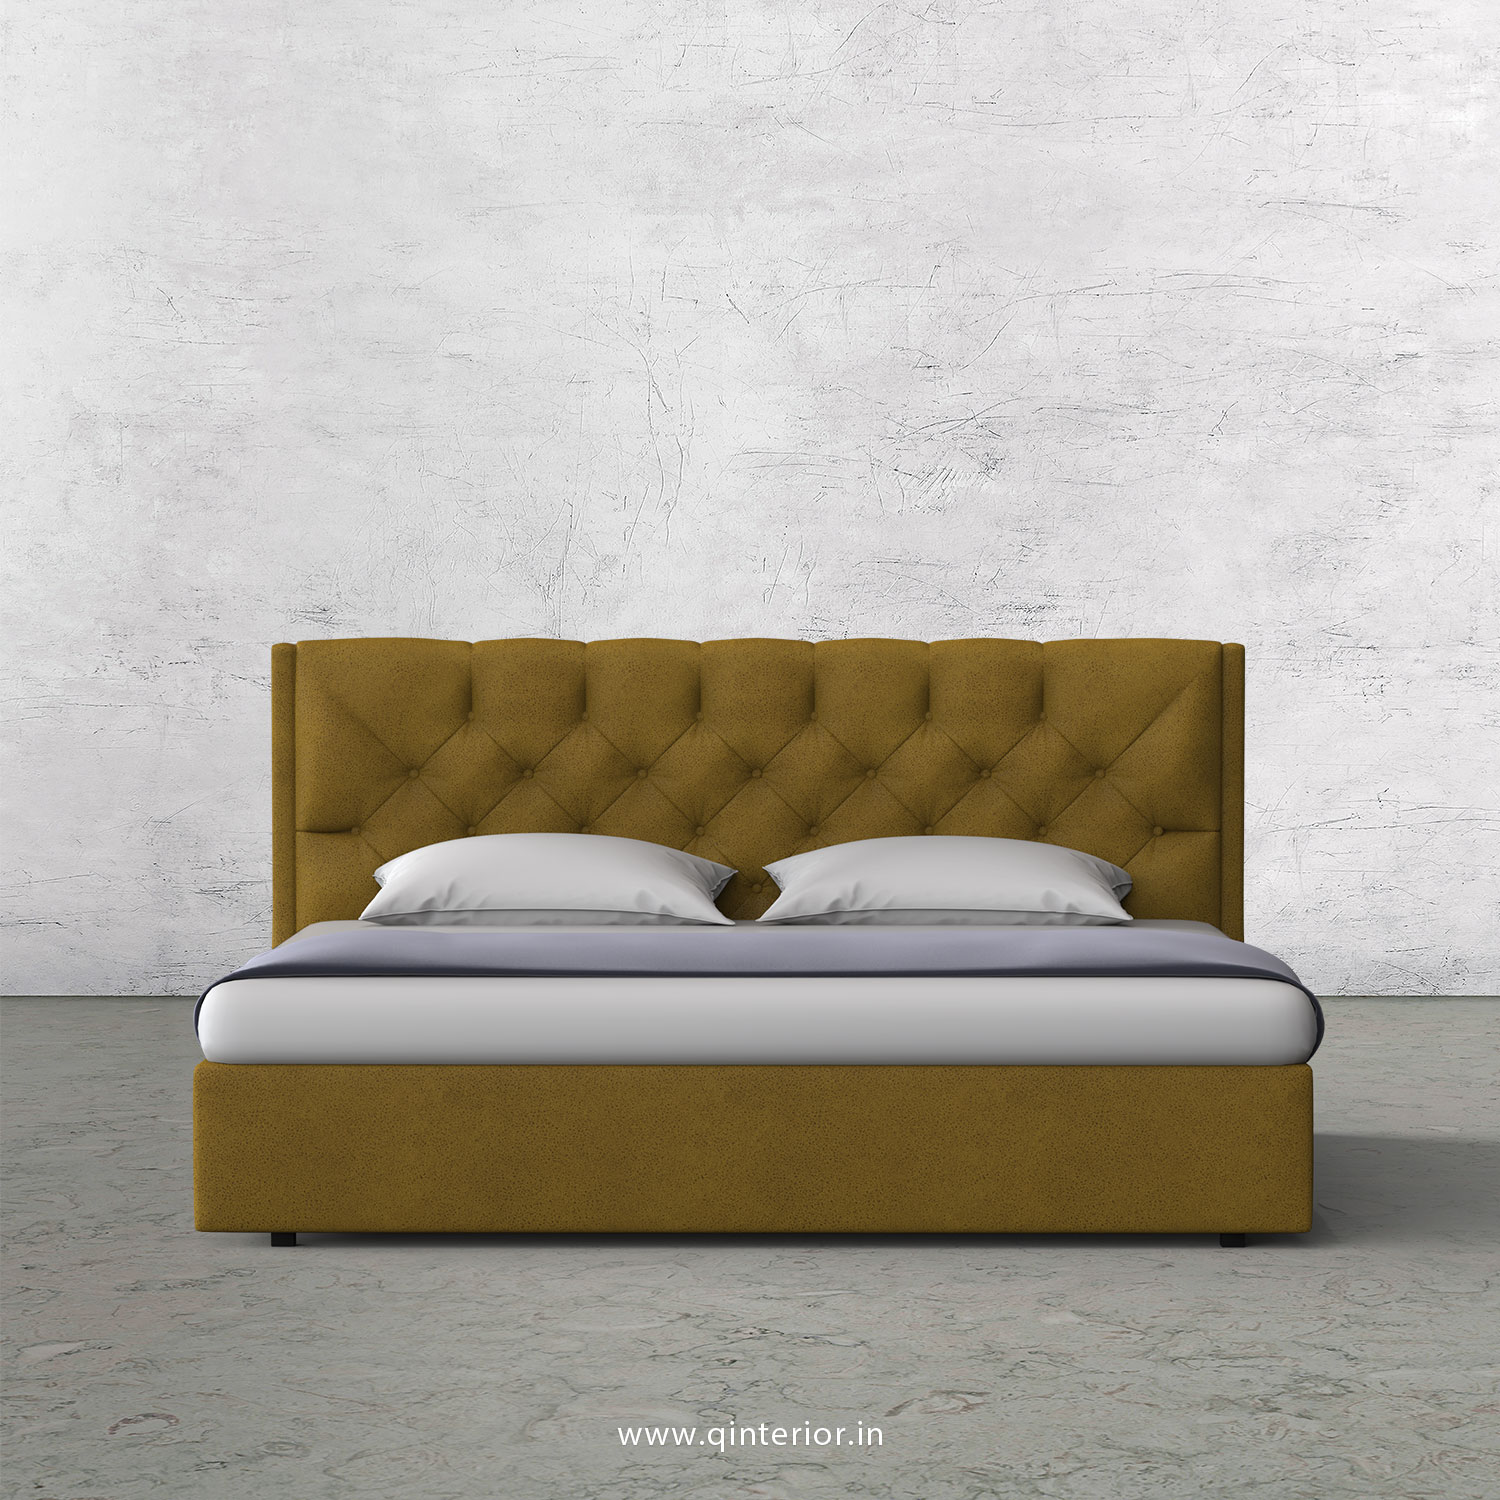 Scorpius King Size Bed in Fab Leather Fabric - KBD009 FL18